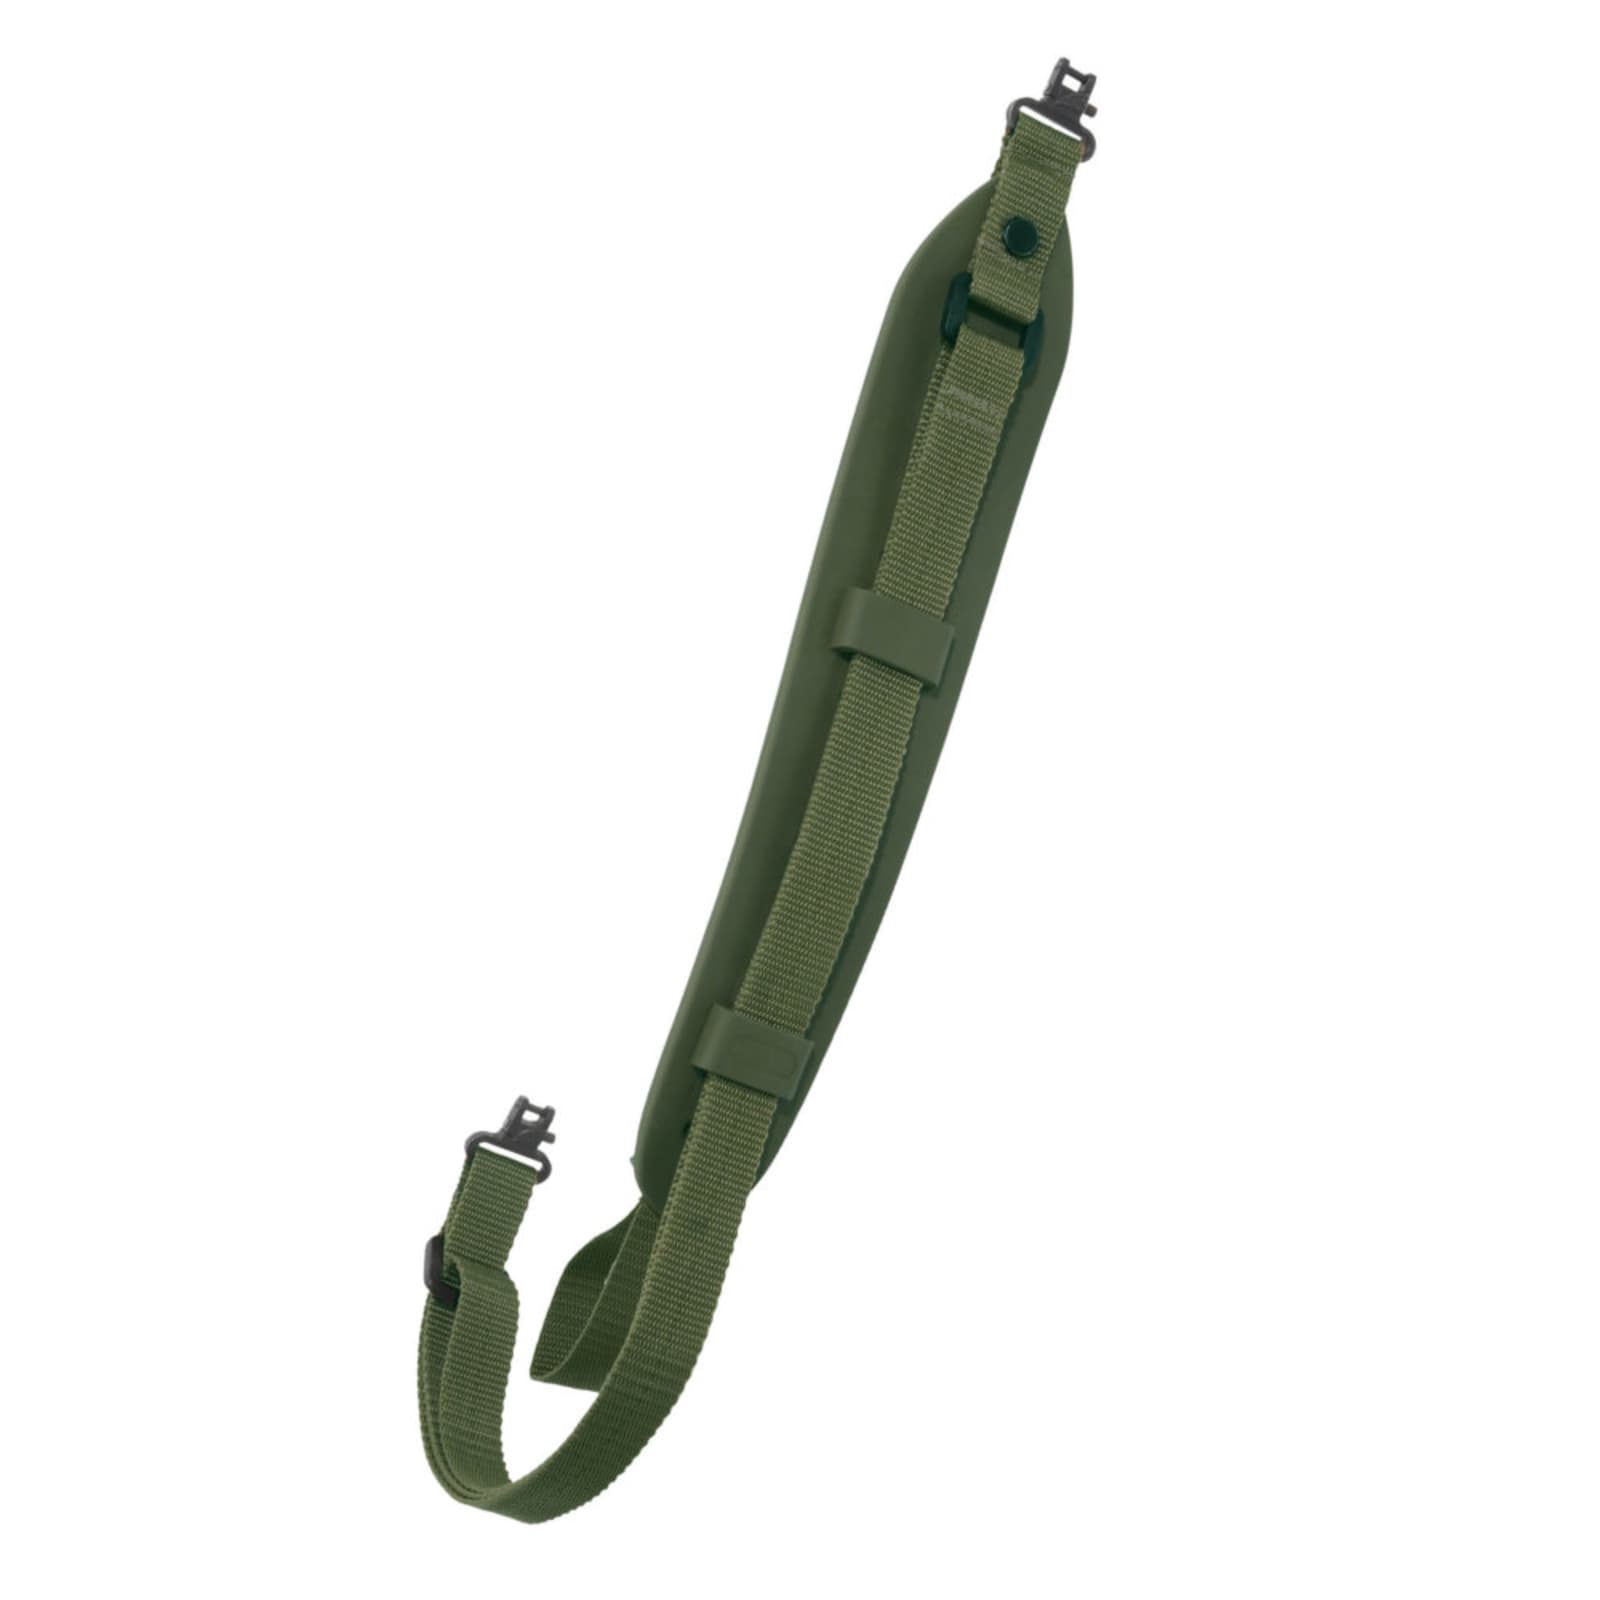 Super Grip Green Rifle Sling w/ Swivels by Outdoor Connection at